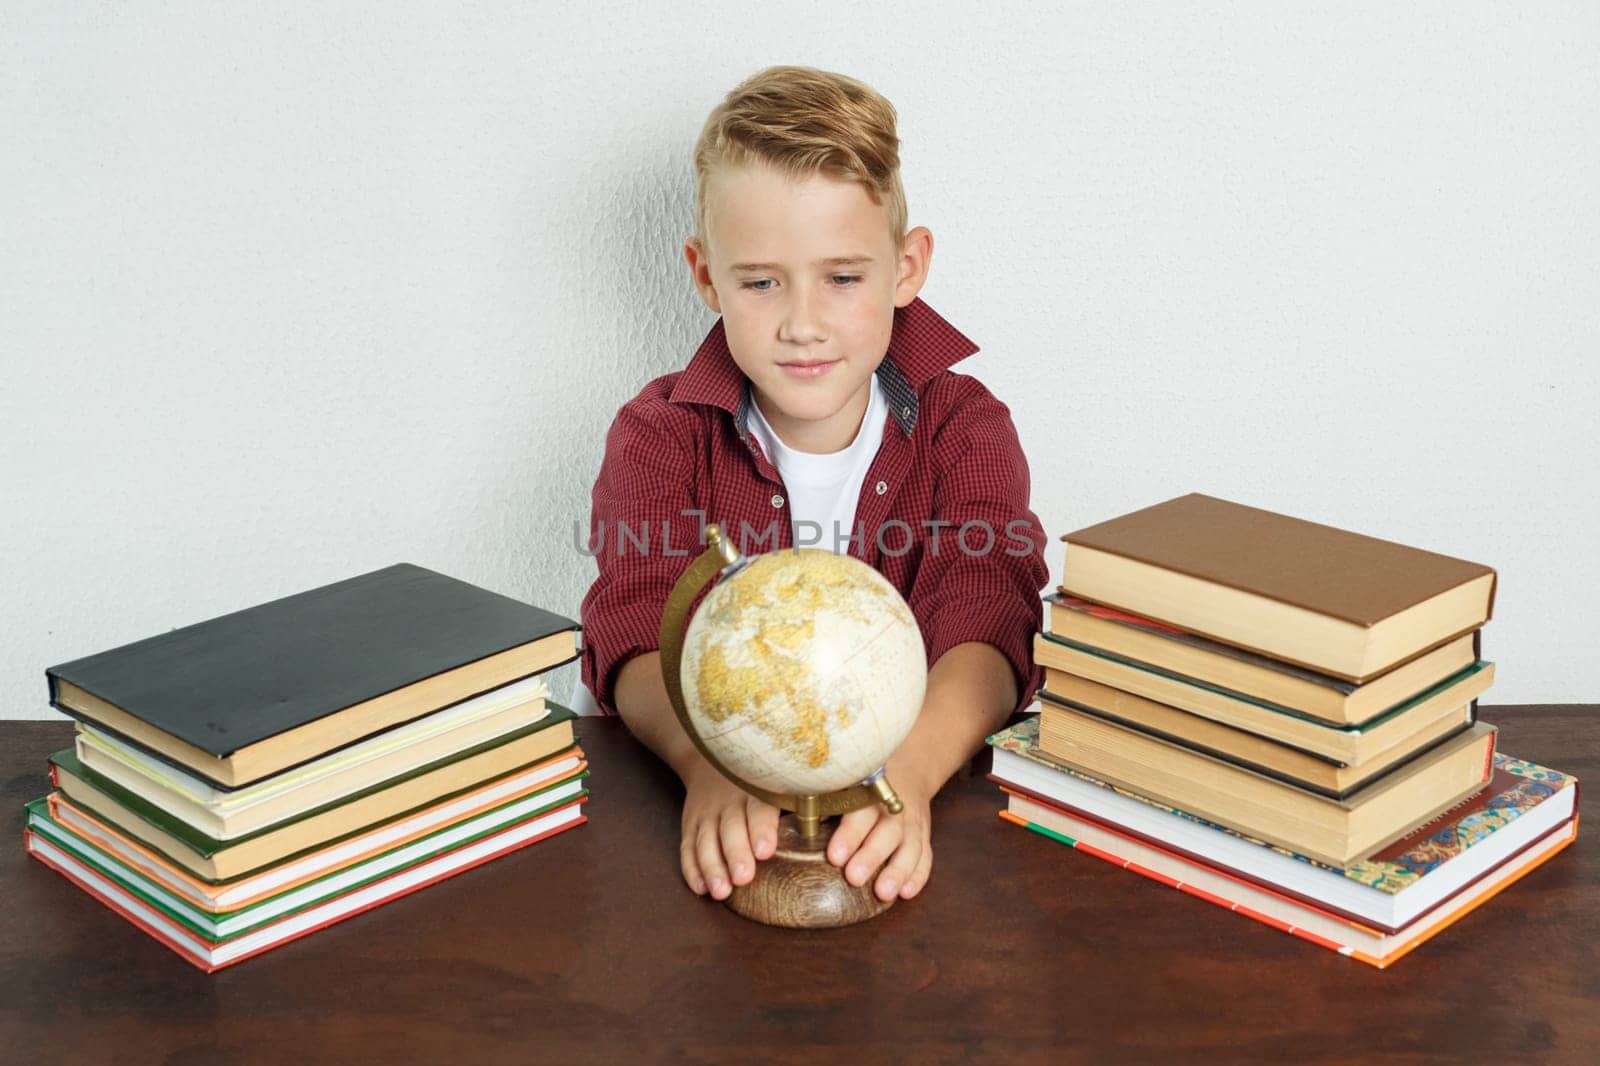 Education concept. The student sits at the table and looks at the globe holding on to it with his hands. On the table there are books, a globe and an alarm clock.